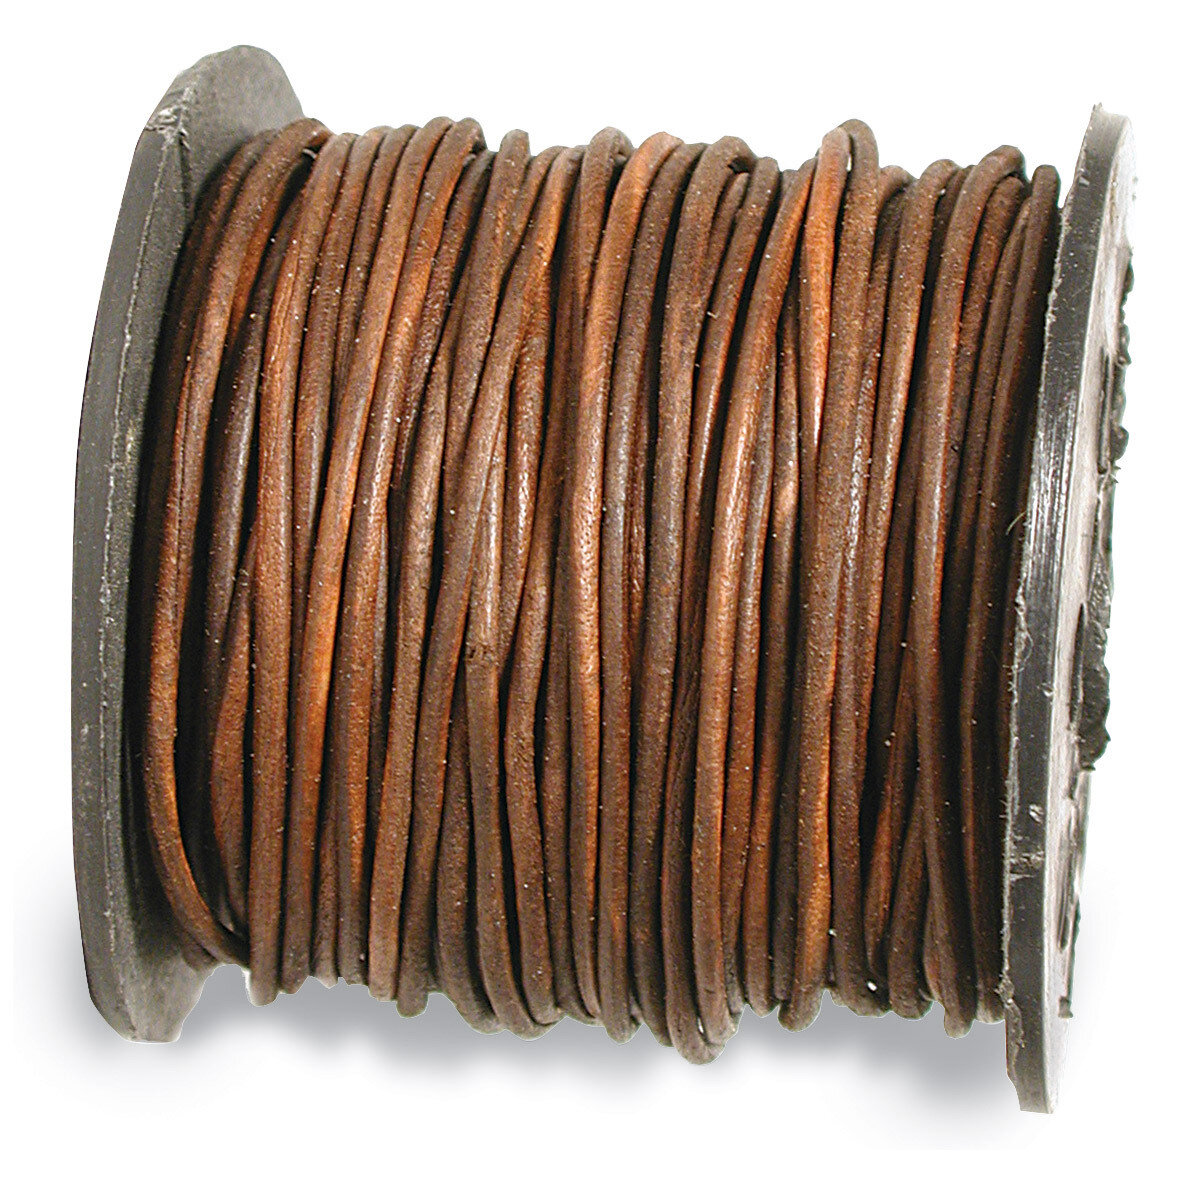 1300 2 mm. 25 Yard Distressed Brown Leather Cord CRD844/2.0-25